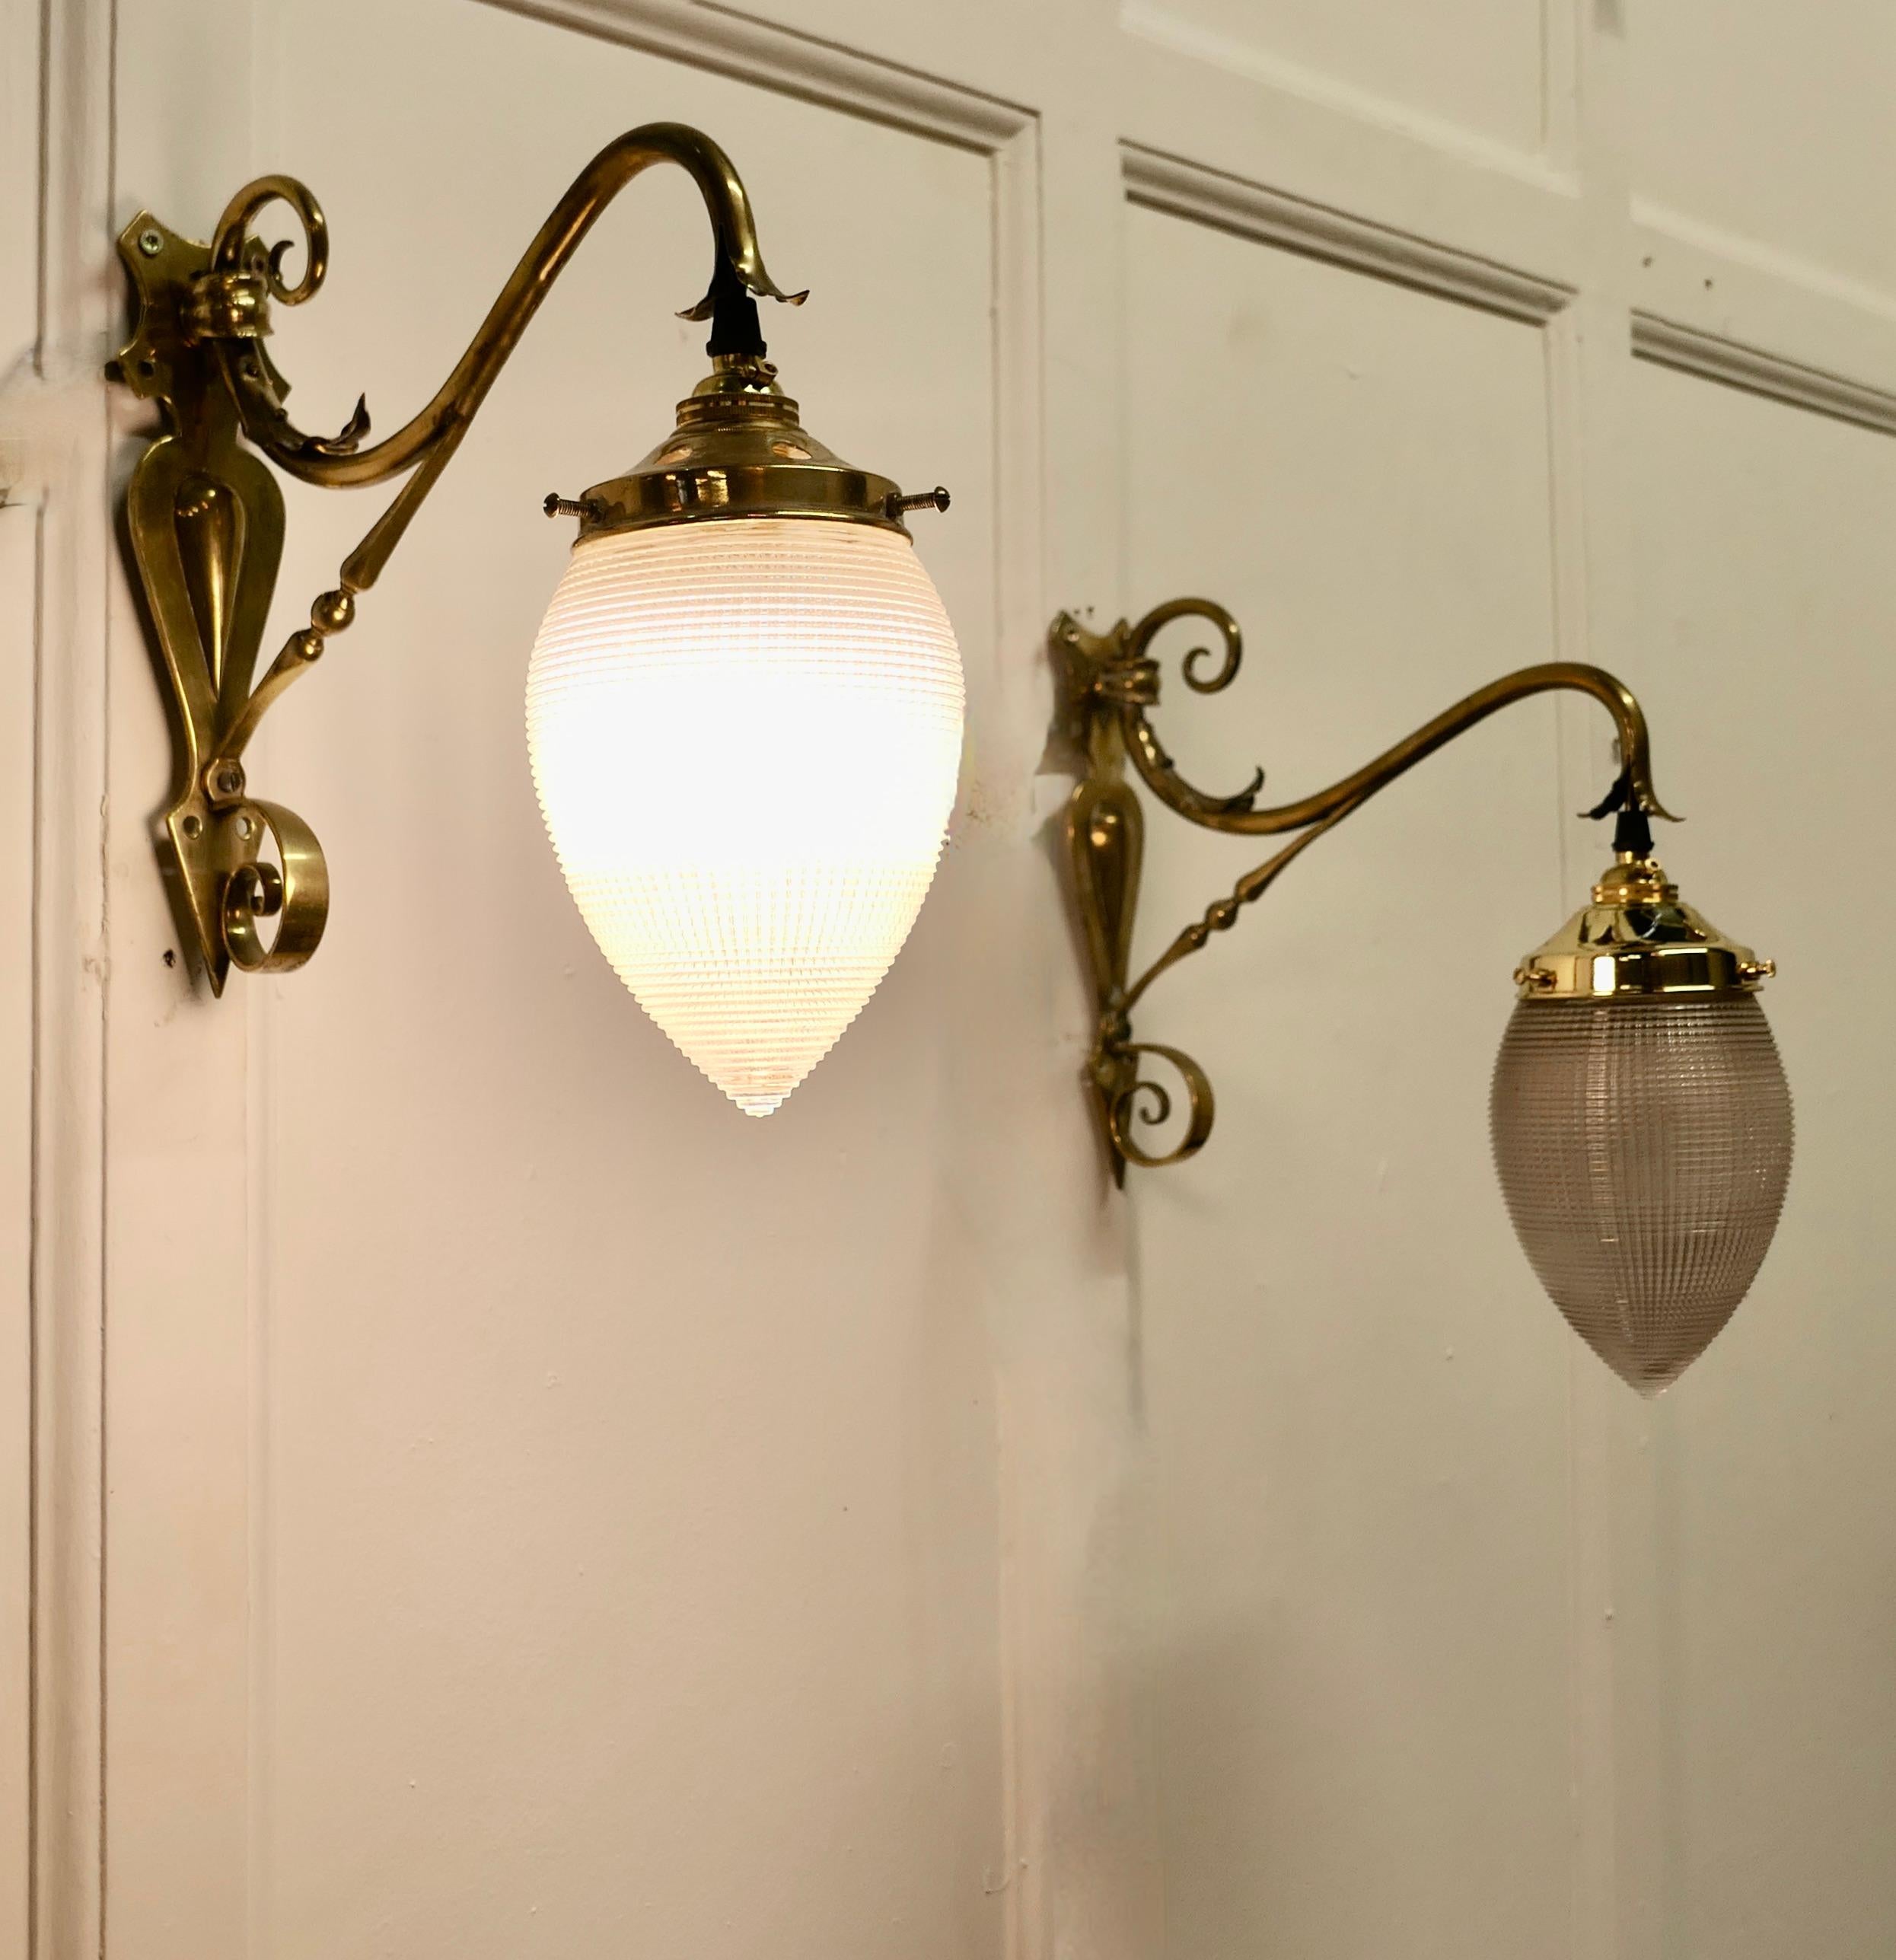 A pair of Victorian Arts and Crafts brass Swan neck wall lights, 

The Lights have decorative brass swan neck arms, they have original Glass Beehive Glass Shades 

All in working order, these lights will need to be connected to an electrical